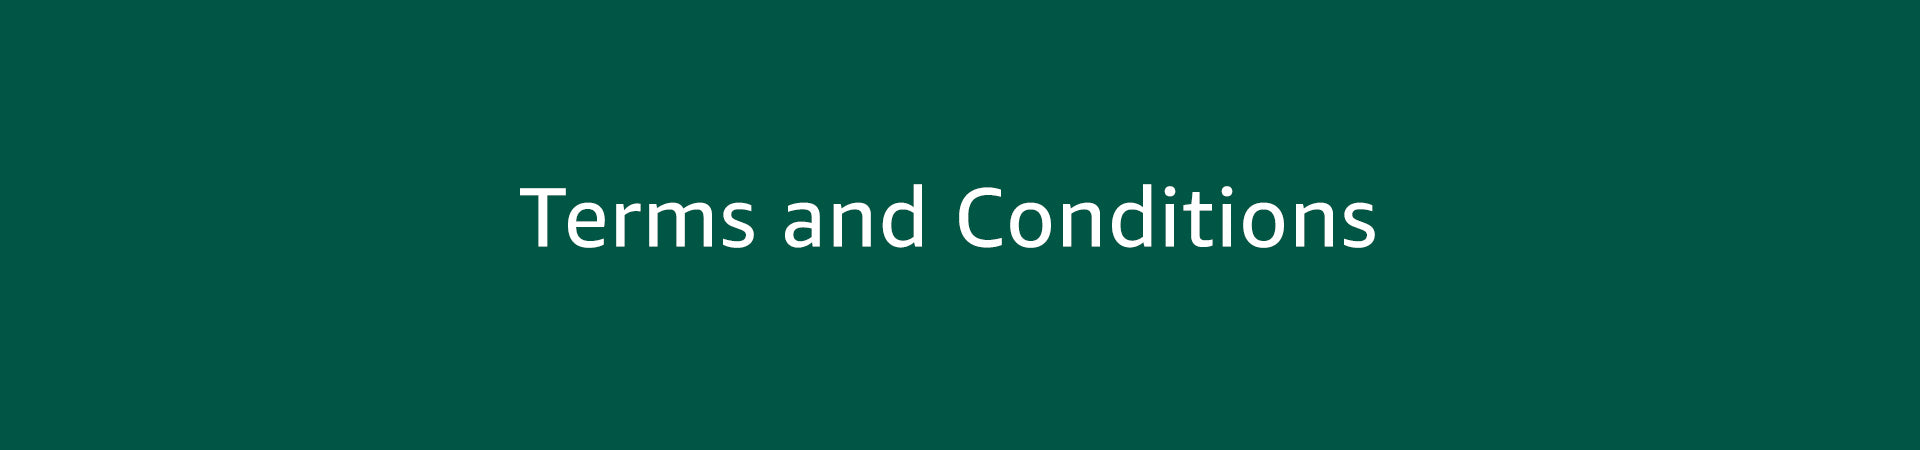 Terms and Conditions - Learn About Our Policies - Biotique